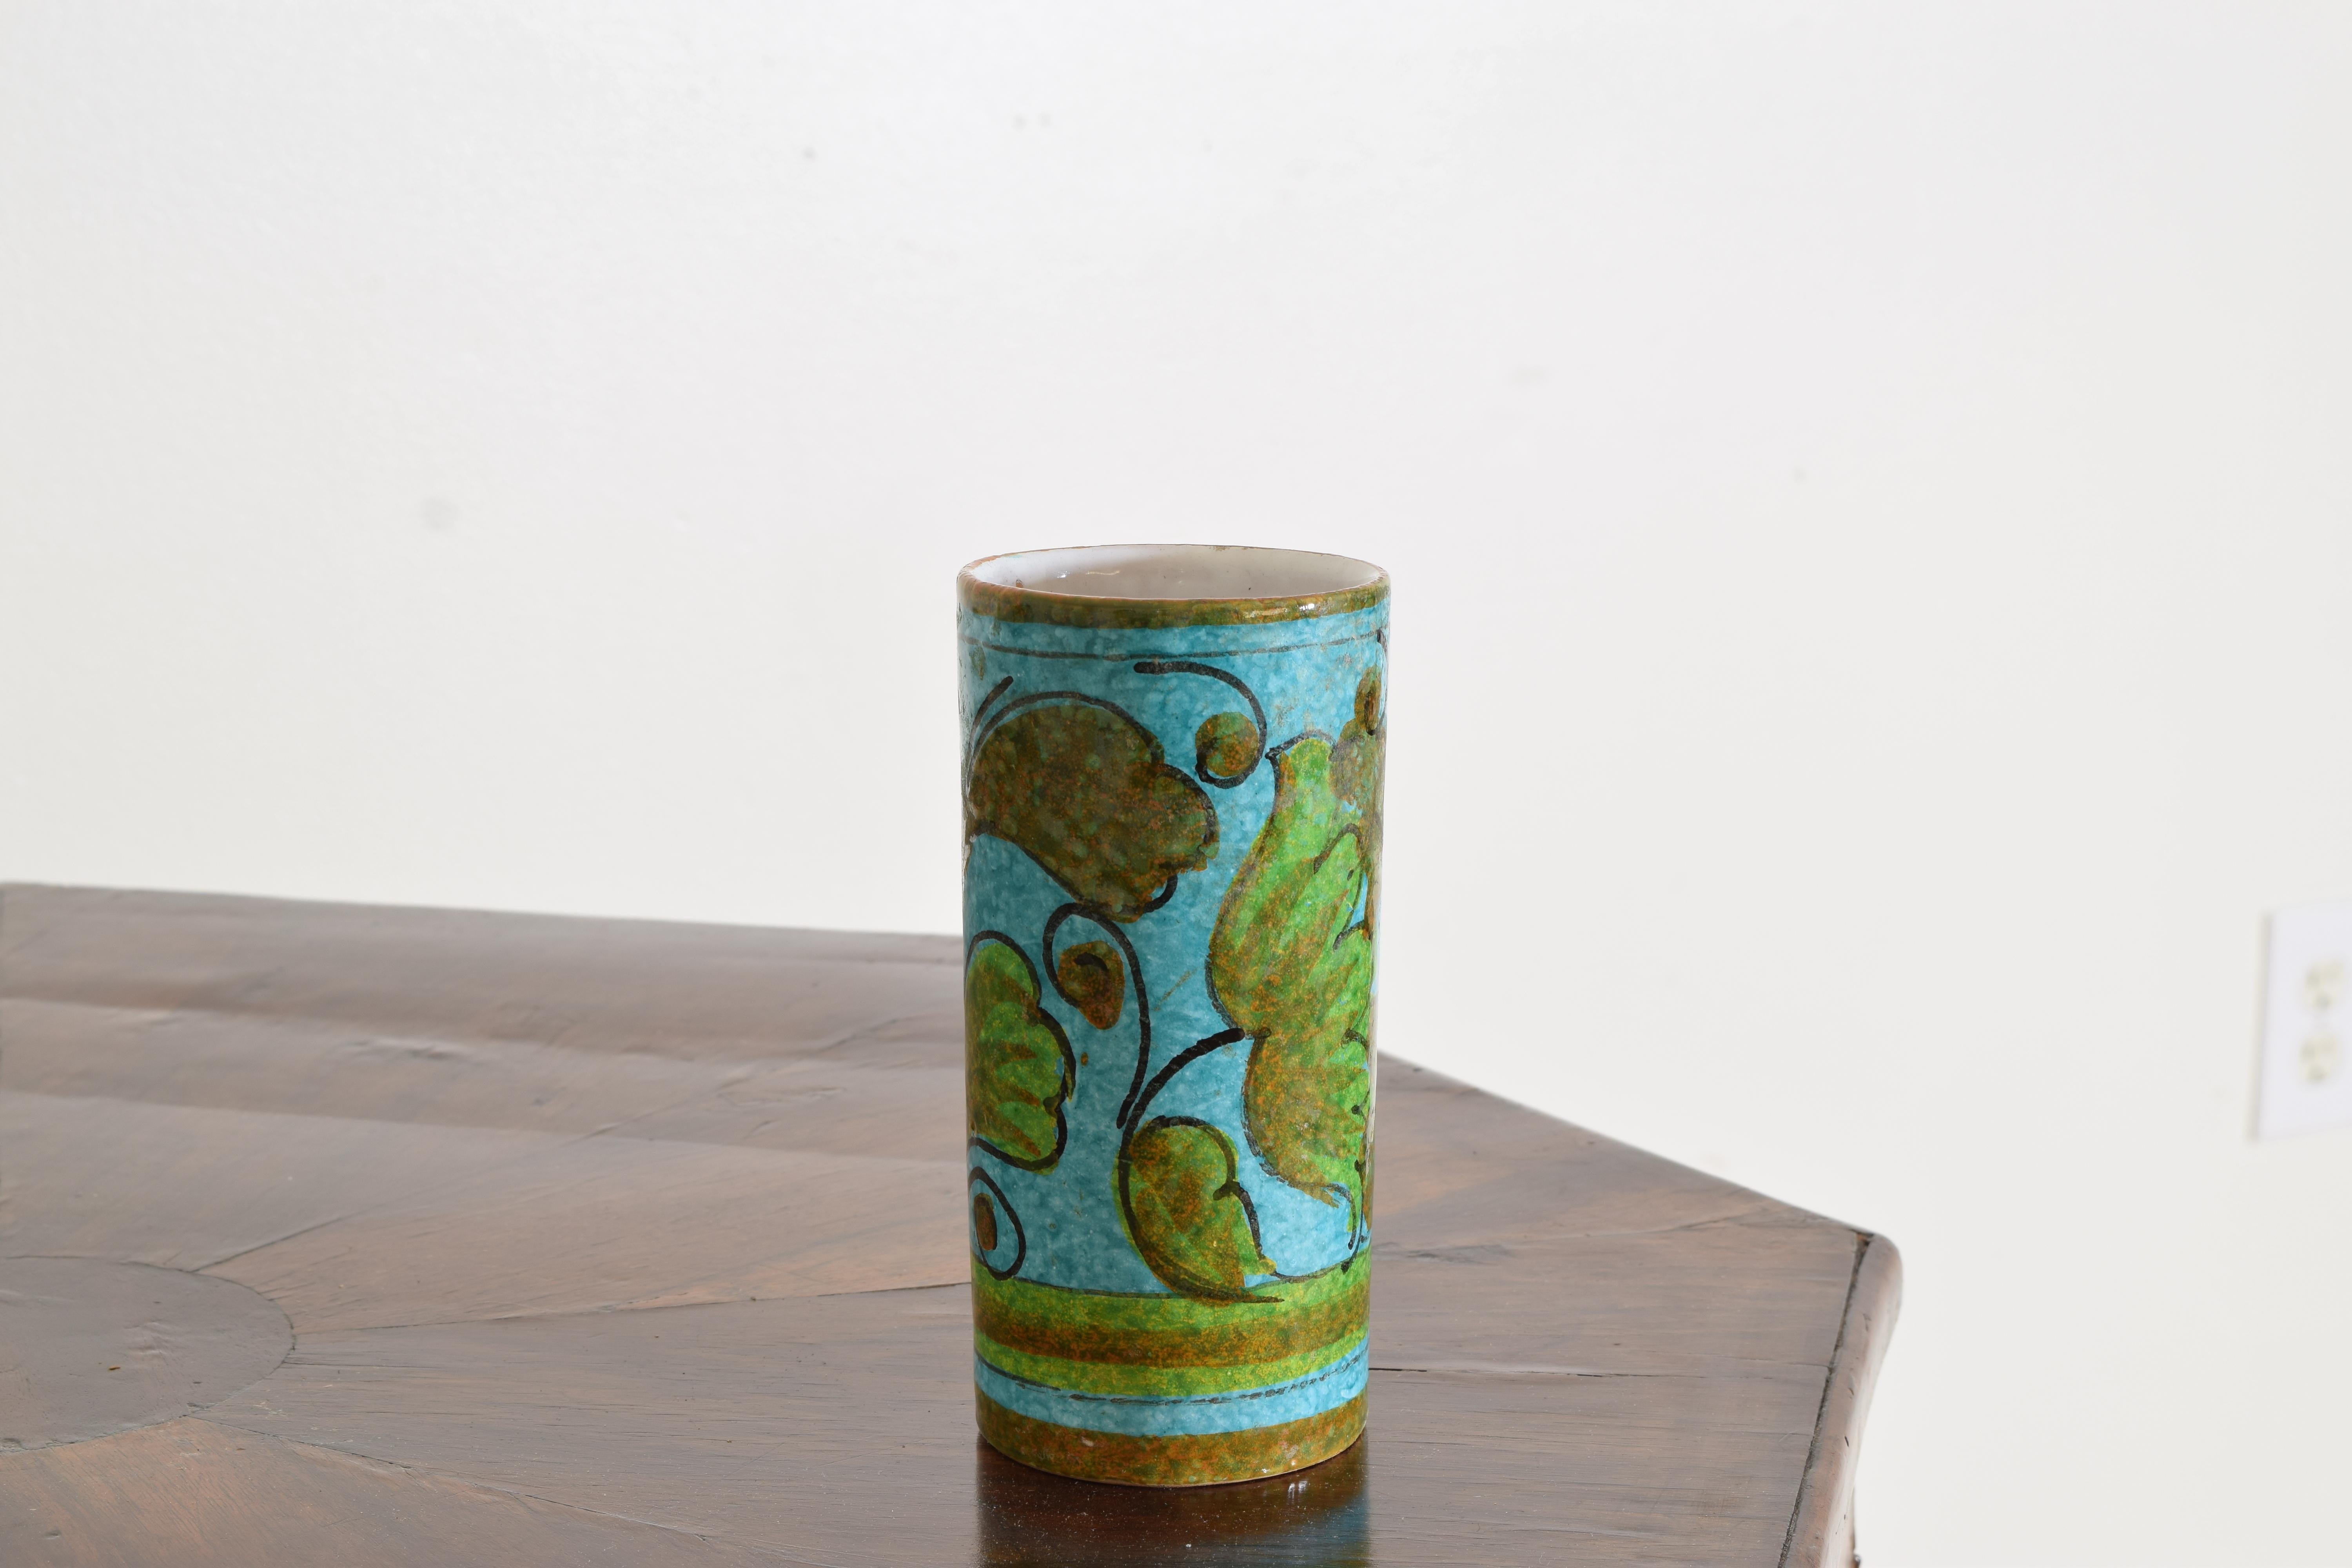 Featuring a beautiful mottled turquoise blue with earthtone-colored foliage and a white glazed interior
Hand-formed, painted, and glazed
